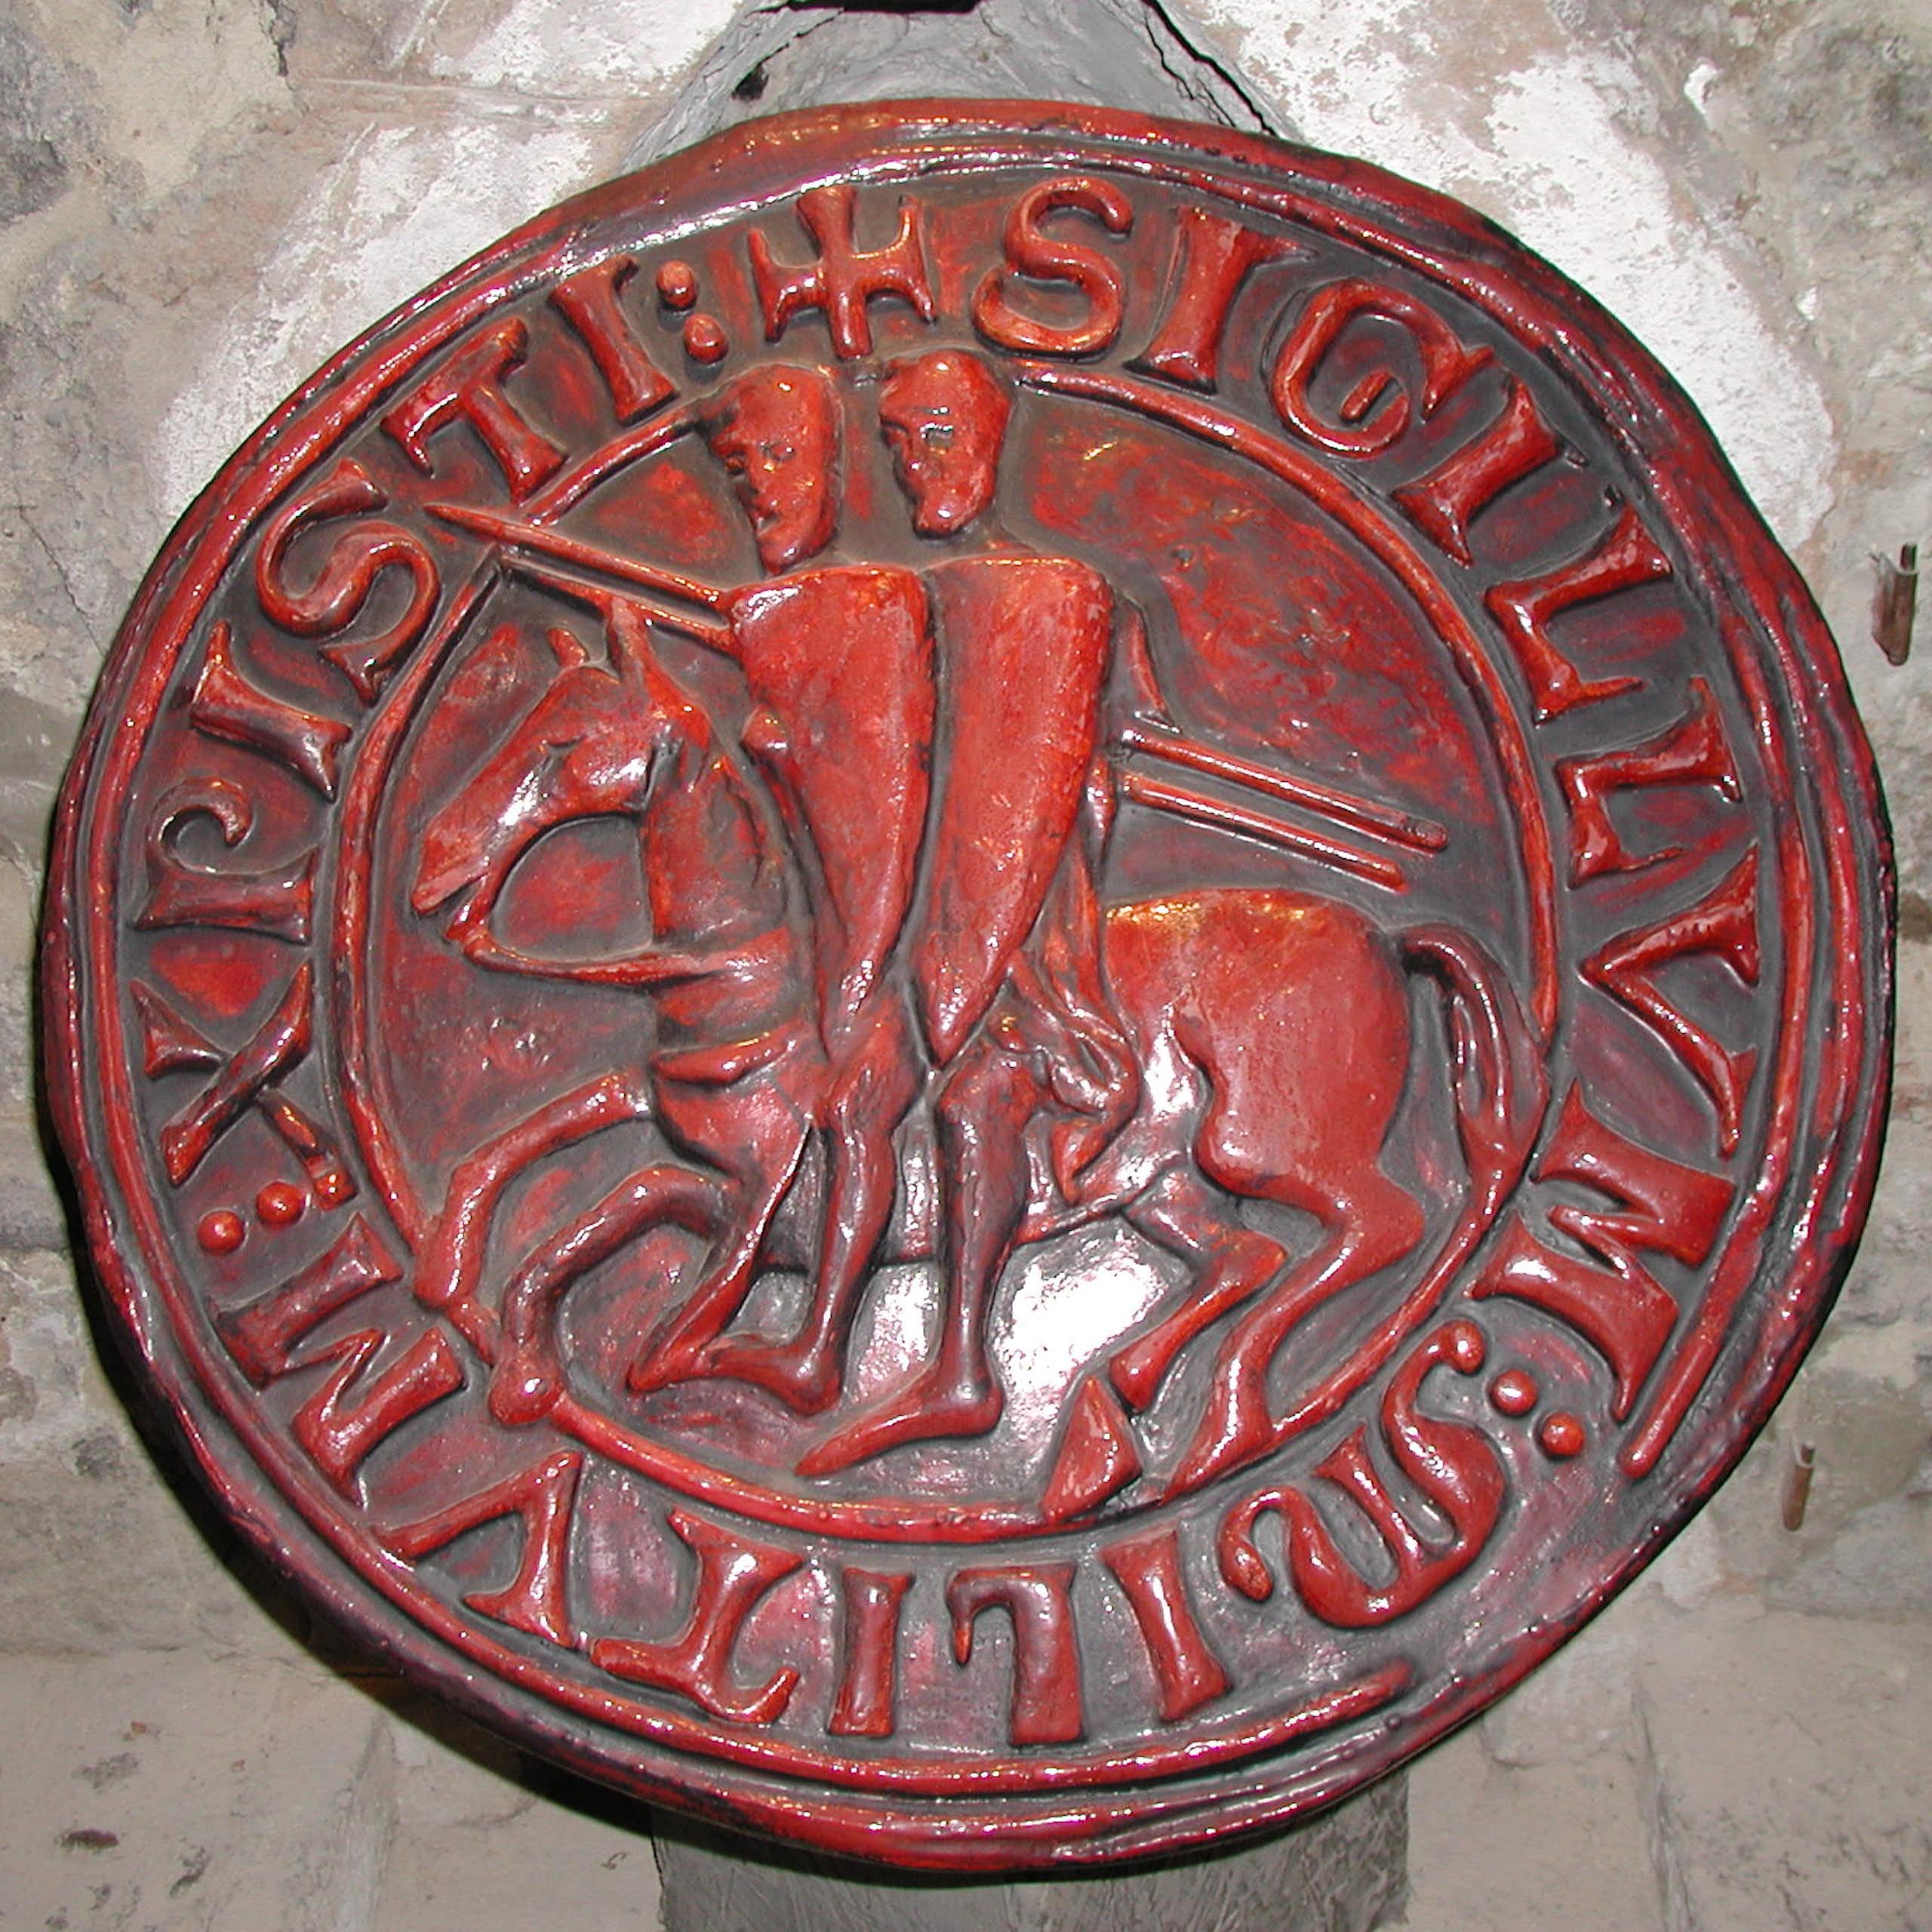 Circular, red seal depicting two knights sitting on one horse